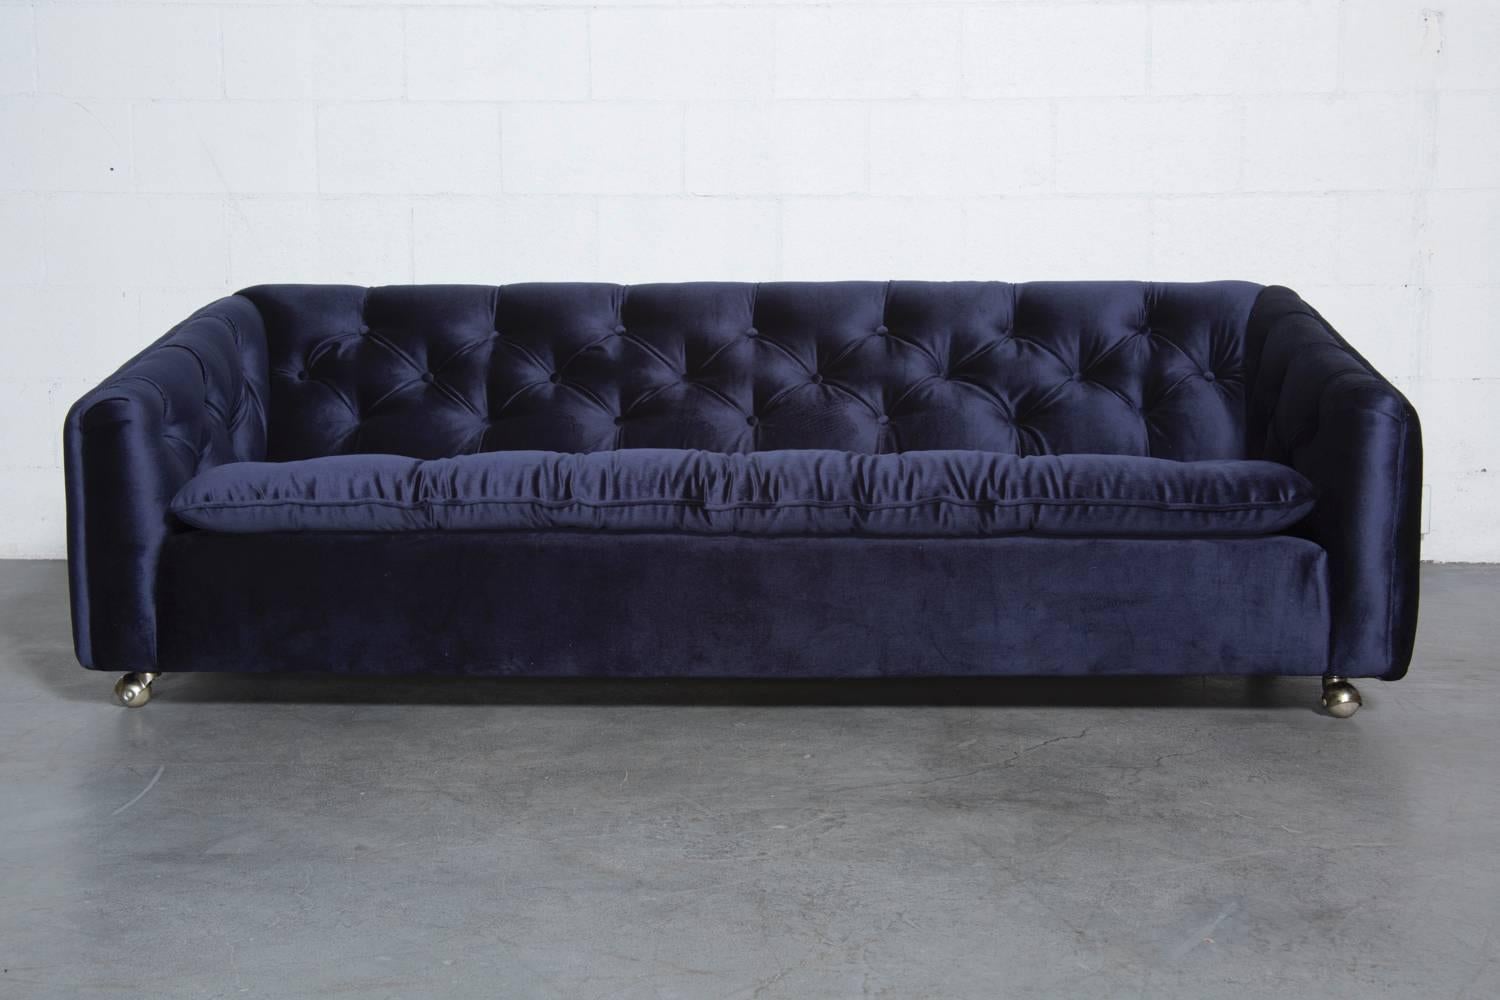 Geoffrey Harcourt / Artifort / Netherlands.
Long and luxurious three-seat navy velvet sofa. This rolling beauty has been newly upholstered.